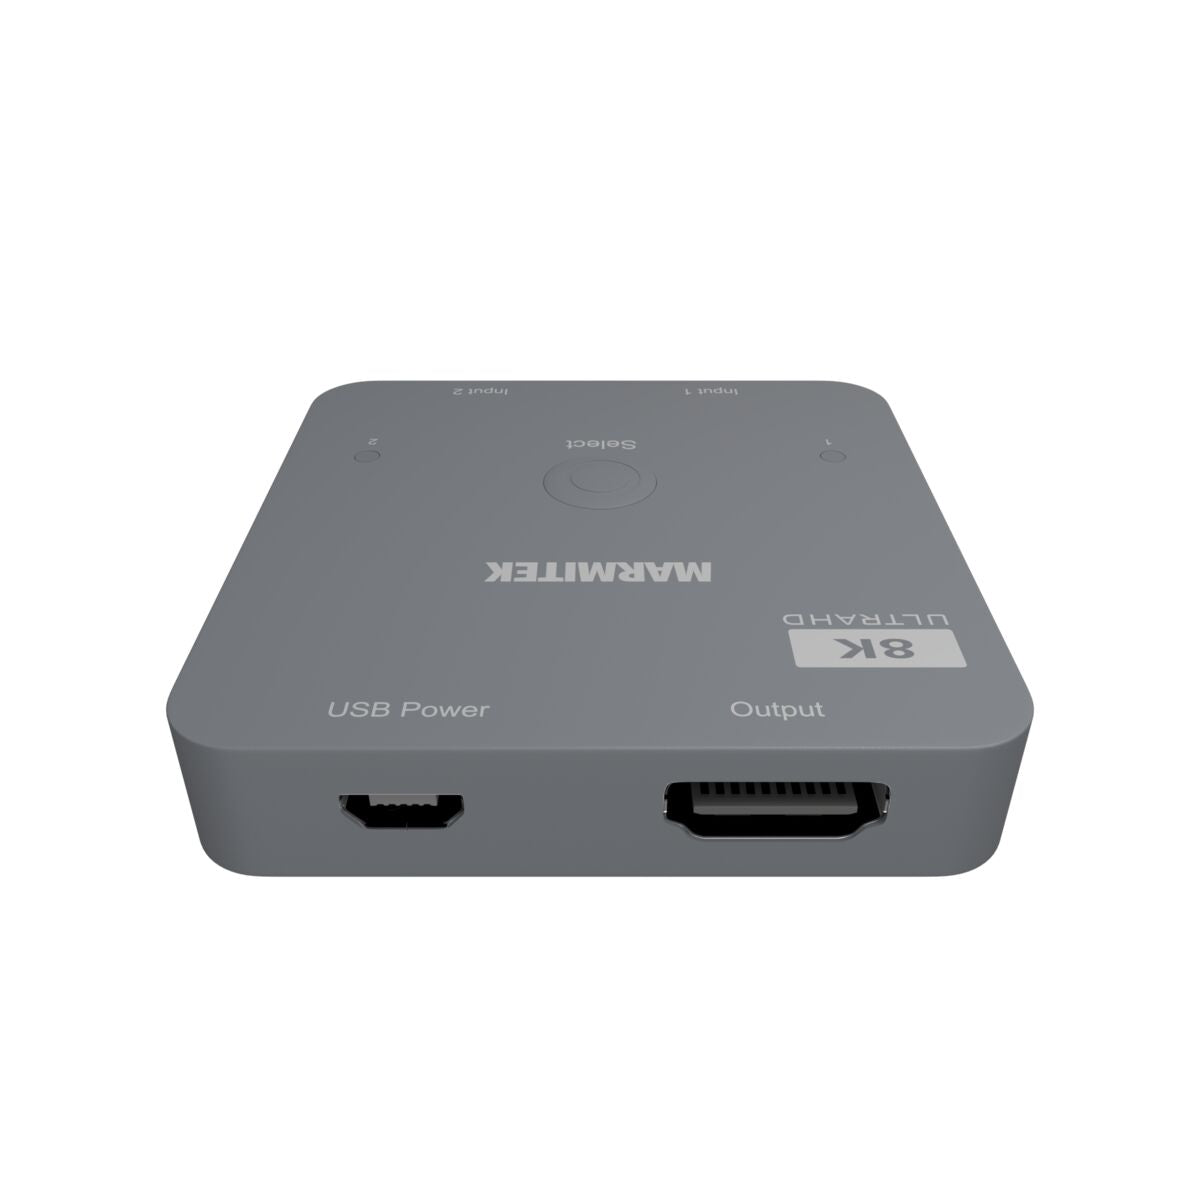 Connect 720 - HDMI switch 4K 120Hz, 8K 60Hz - 2 in / 1 out - Connections Image of USB power and HDMI output | Marmitek